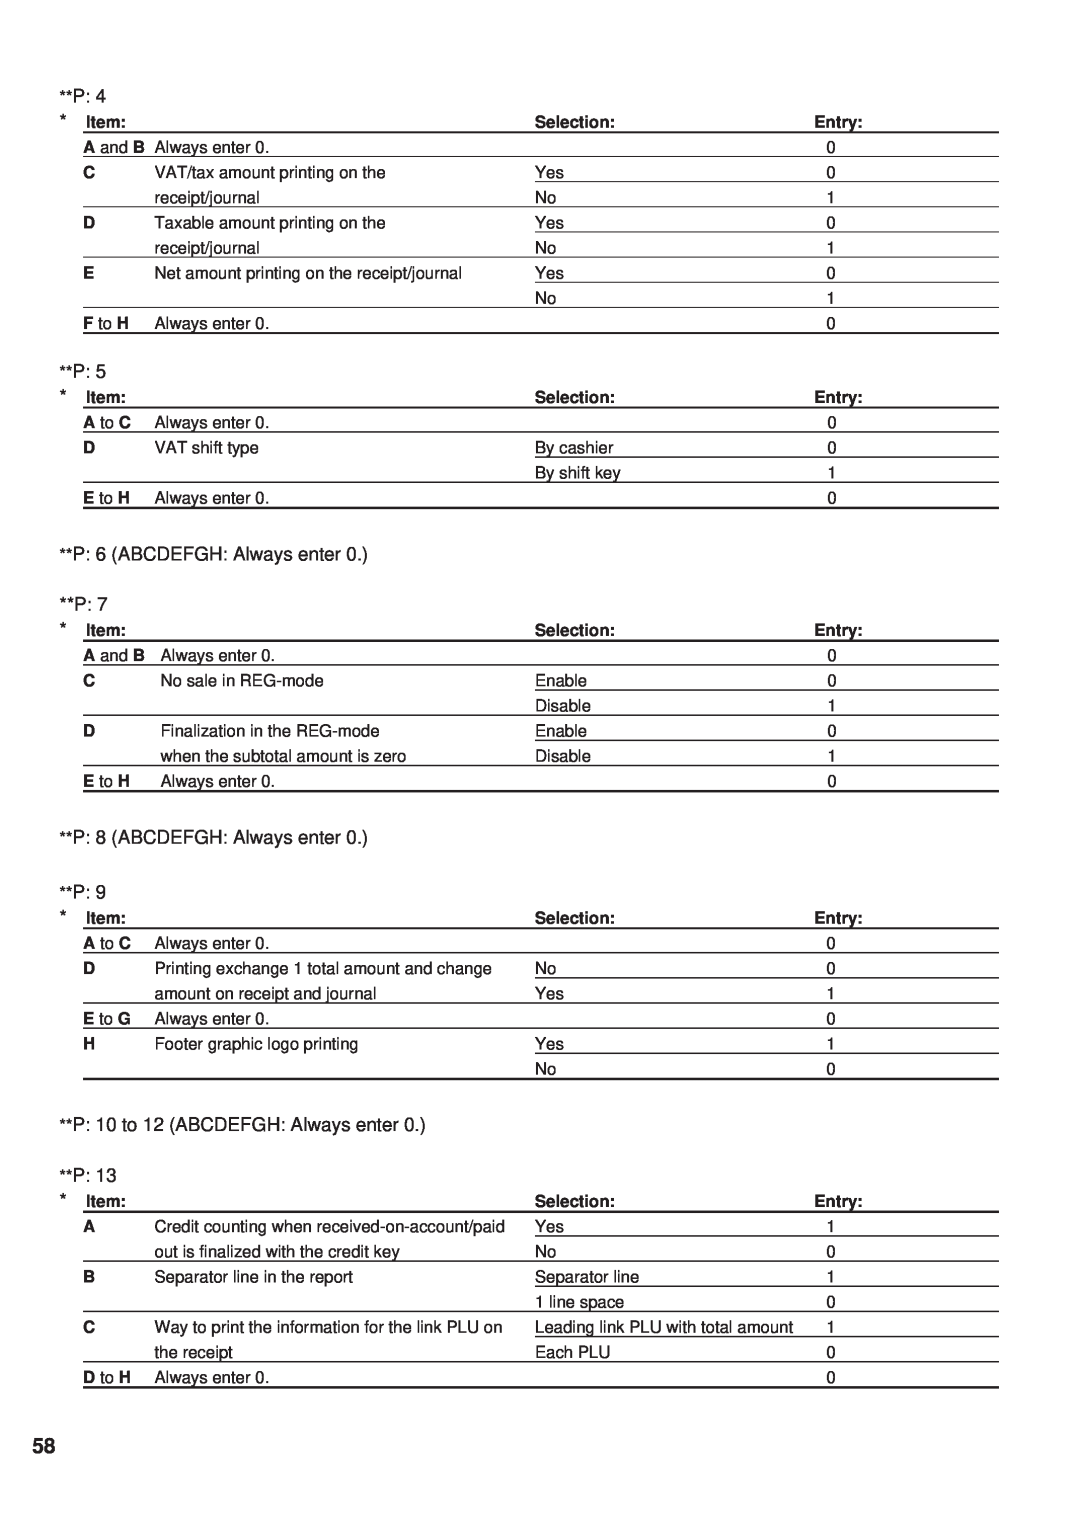 Sharp ER-A450 instruction manual Selection, Entry, F to H, A to C 